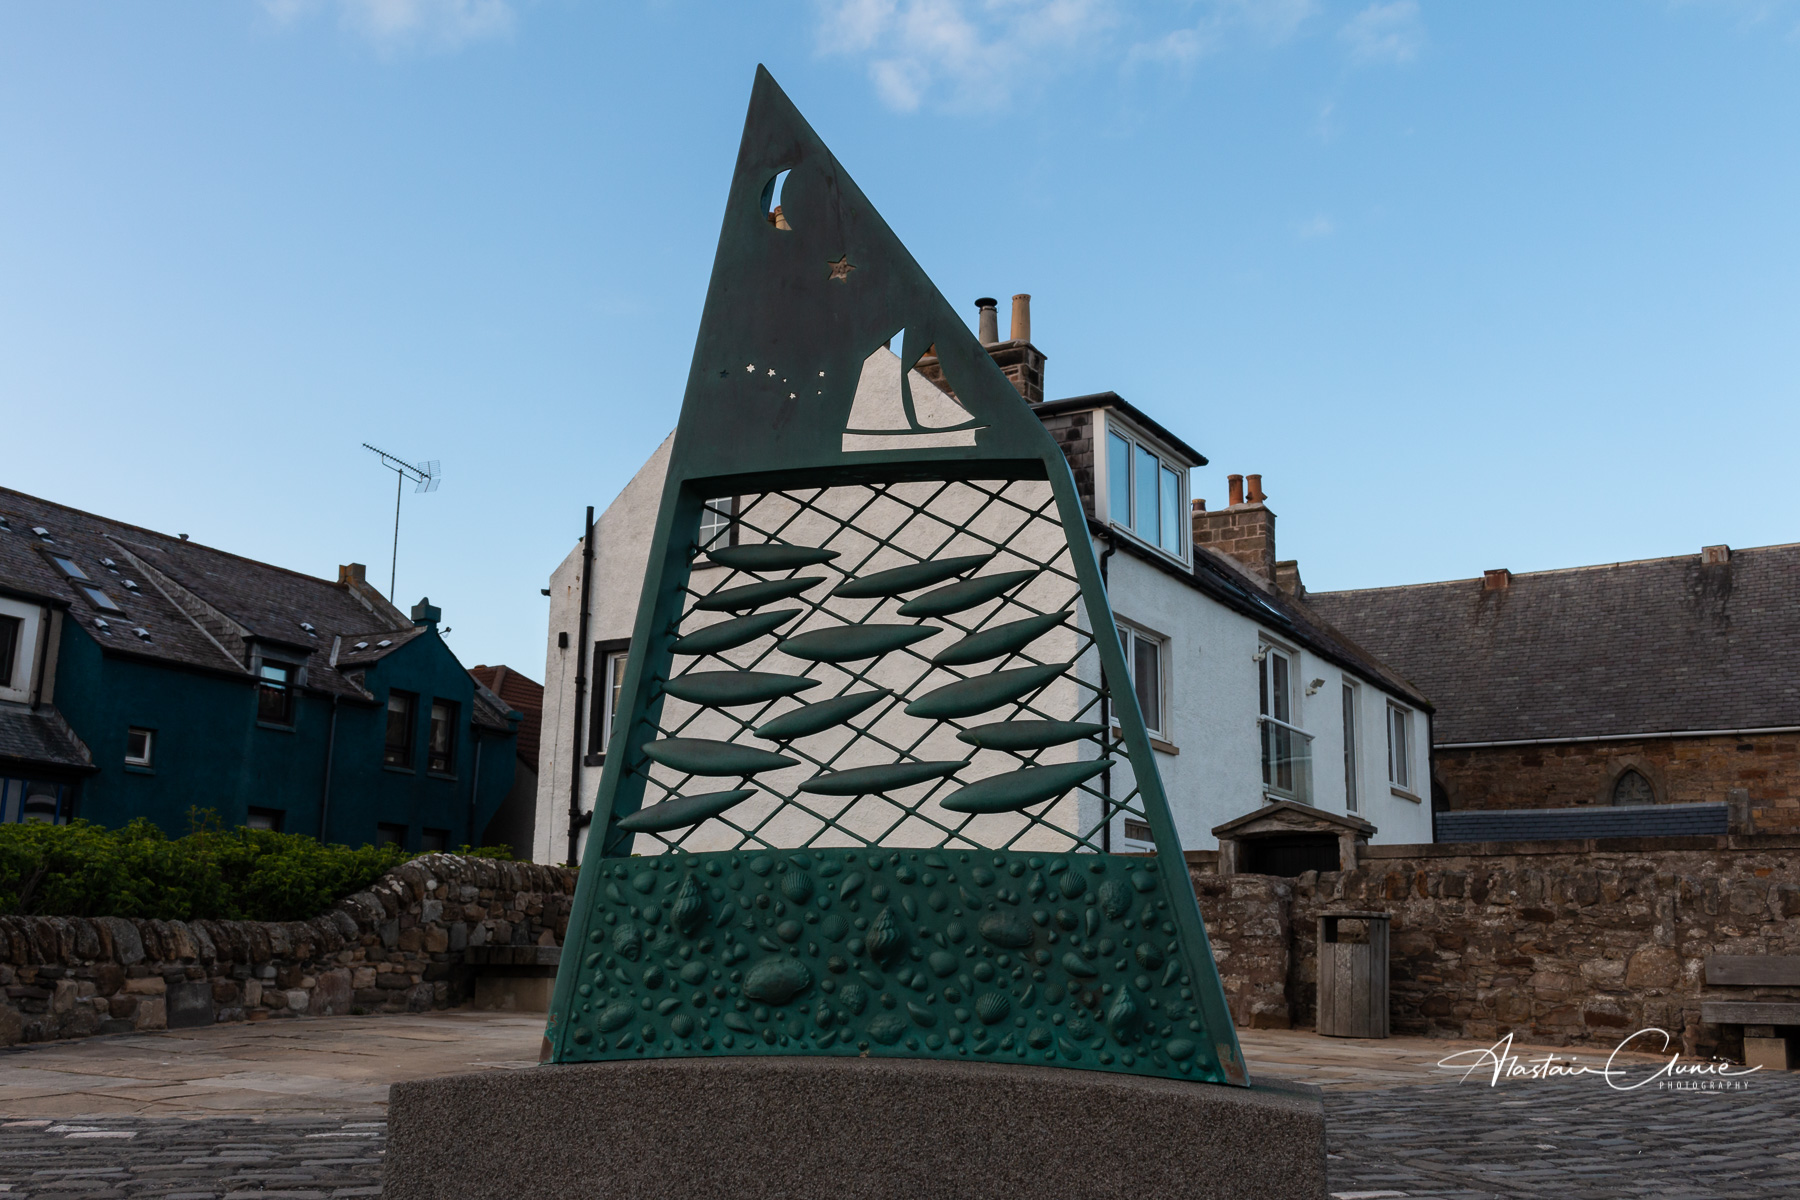 sculpture of fish, nets and boats